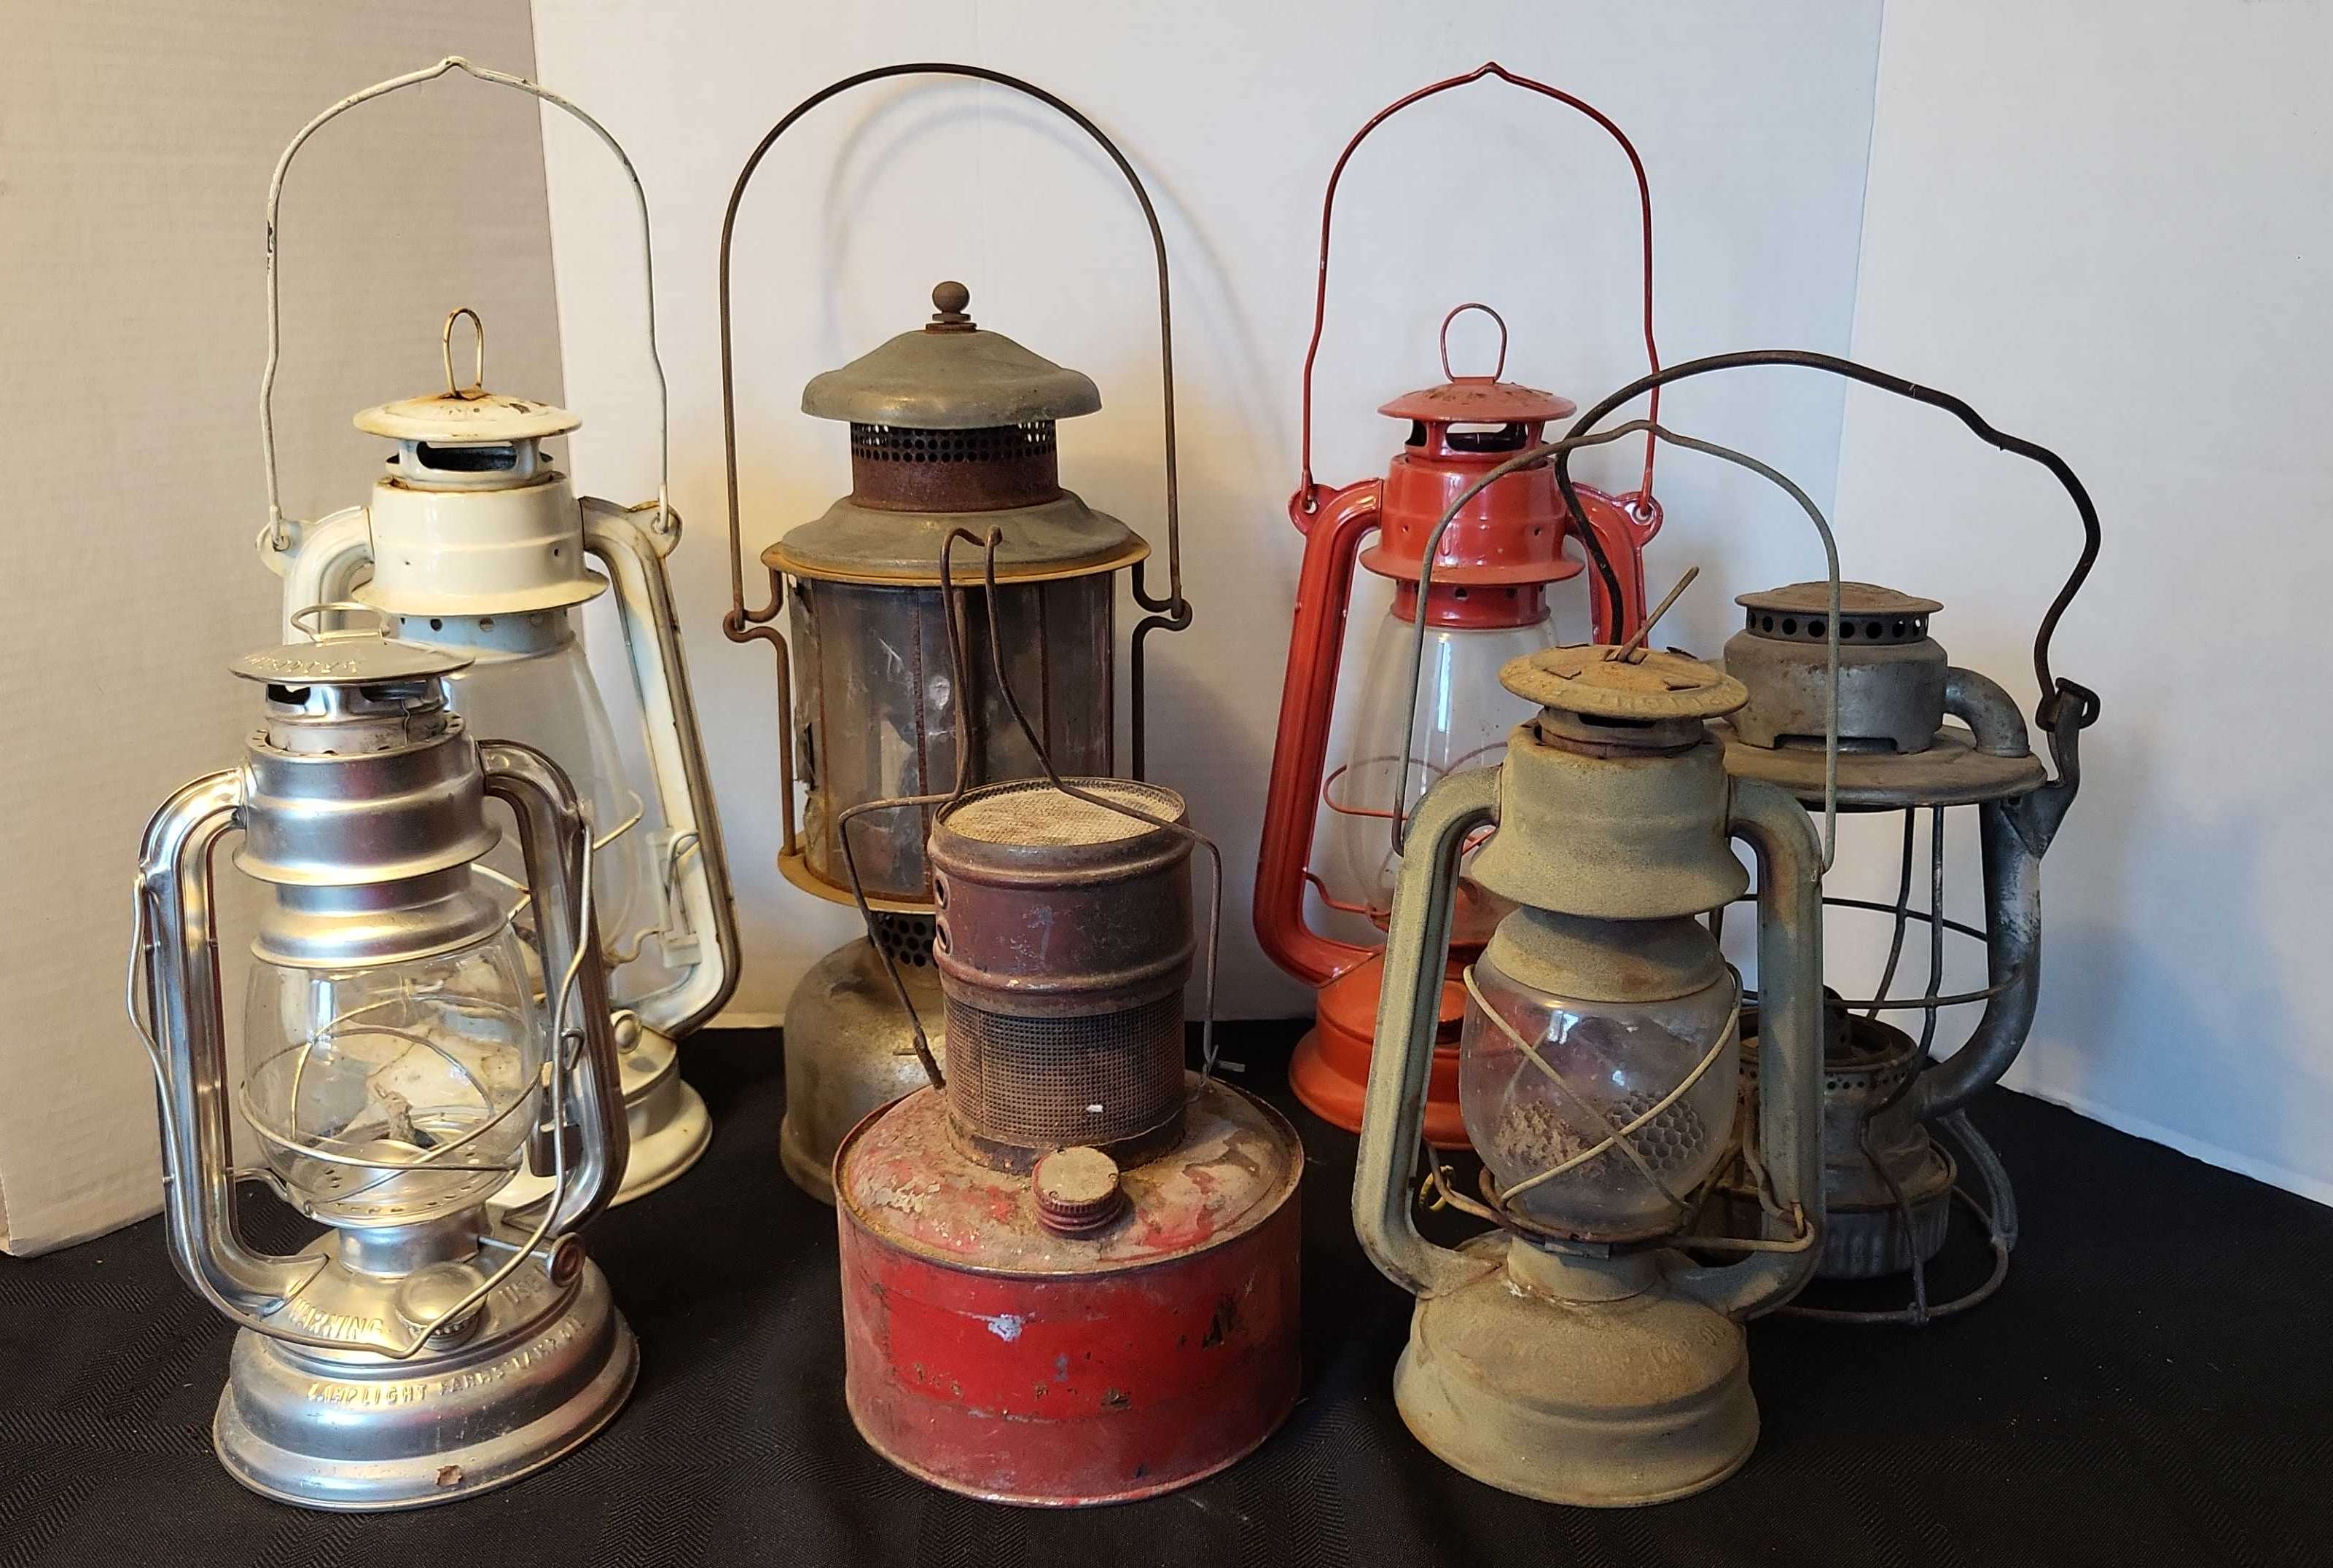 Lot antique OIL LAMP WICKS: Round 1/8 & Flat roll of 5/8, Flat of 1 & 5/8